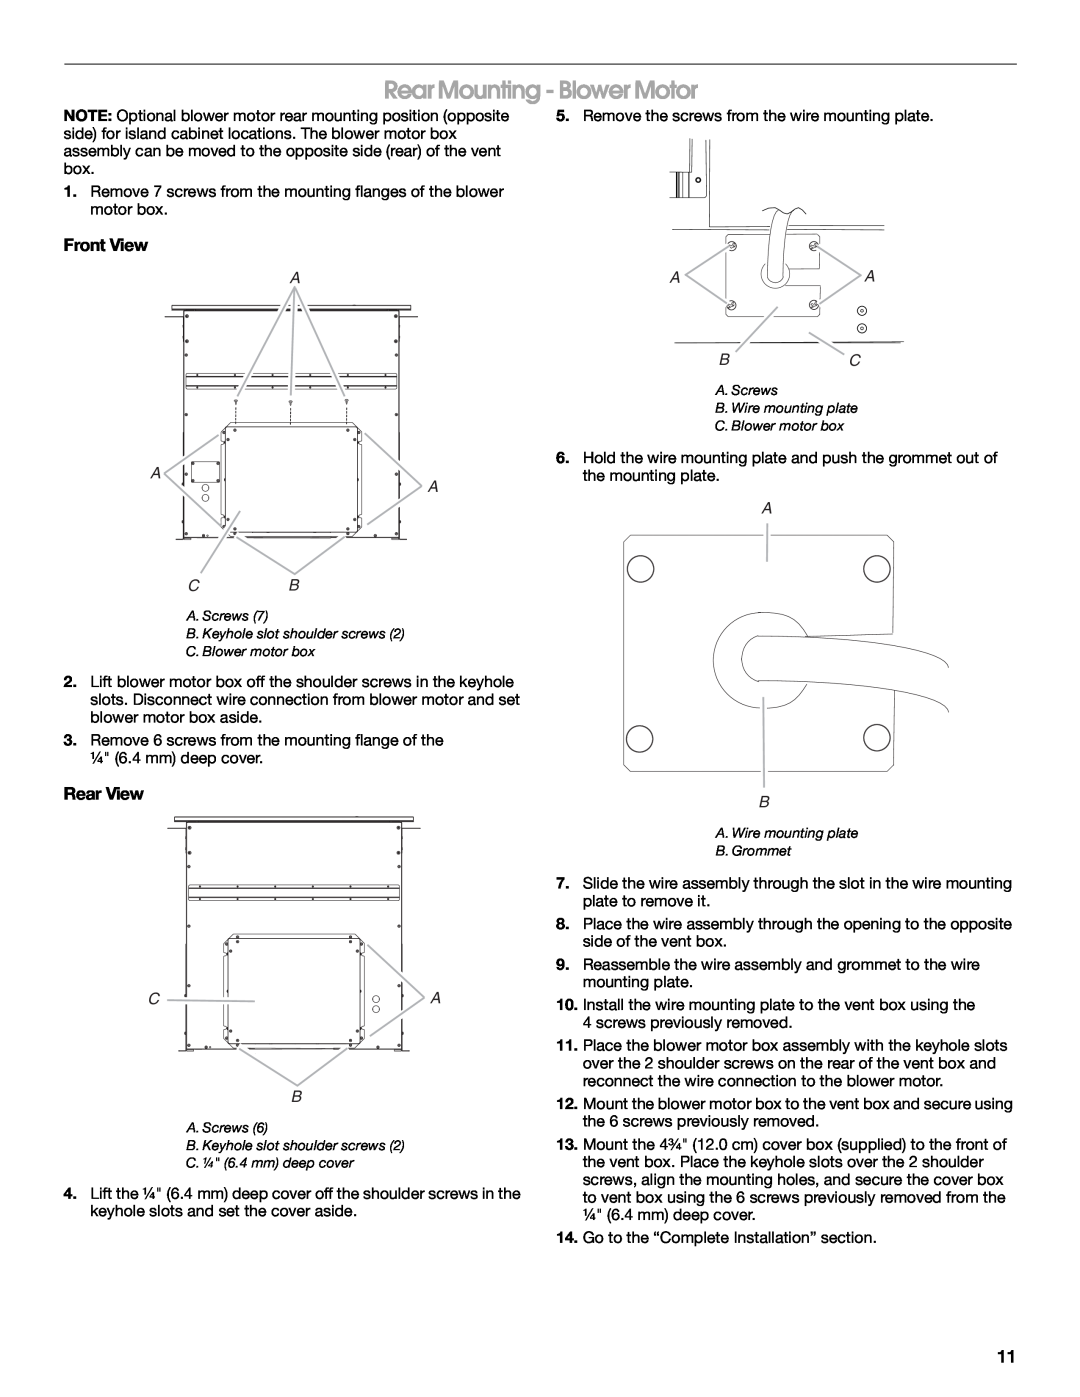 Jenn-Air LI3ZVB/W10342490D installation instructions Rear Mounting - Blower Motor, Front View, Rear View, A A Bc 